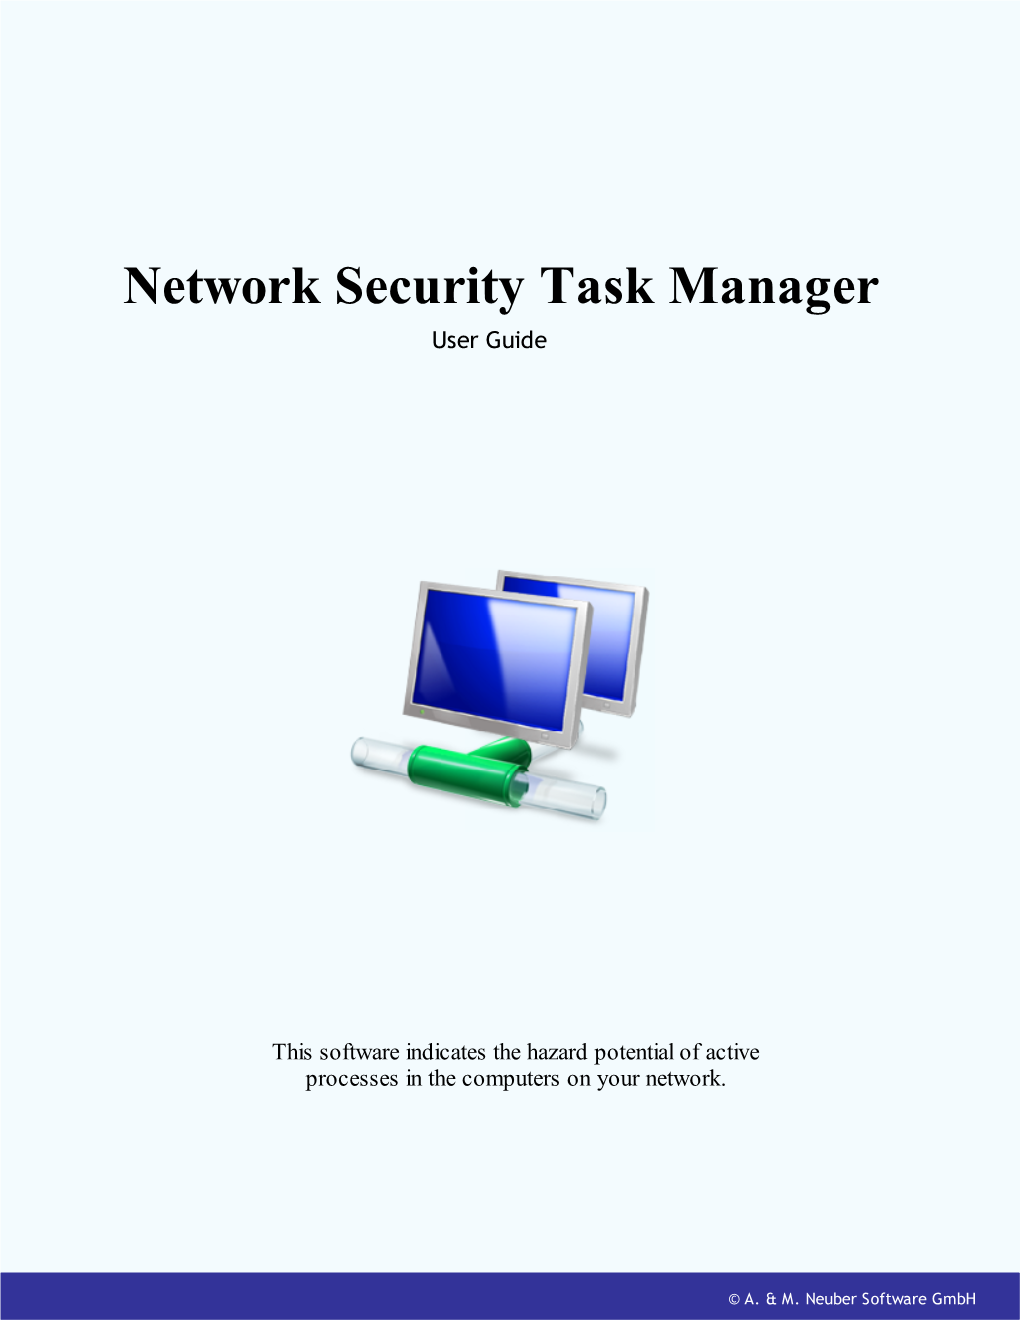 Network Security Task Manager User Guide